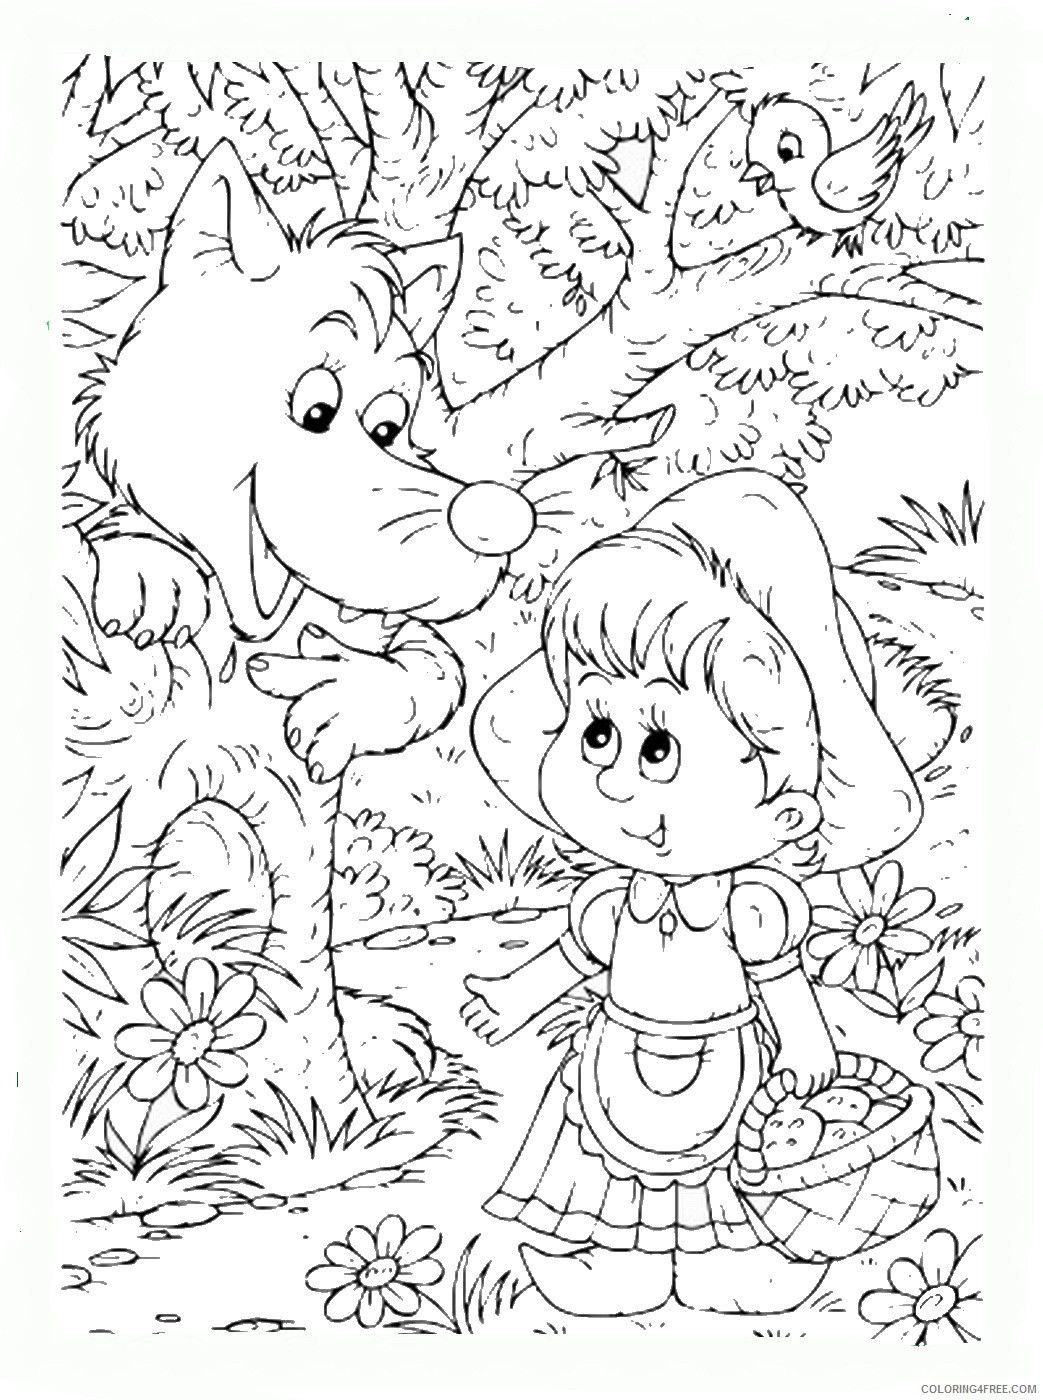 Little Red Riding Hood Coloring Pages Cartoons little_red_ridinghood_32 Printable 2020 3865 Coloring4free